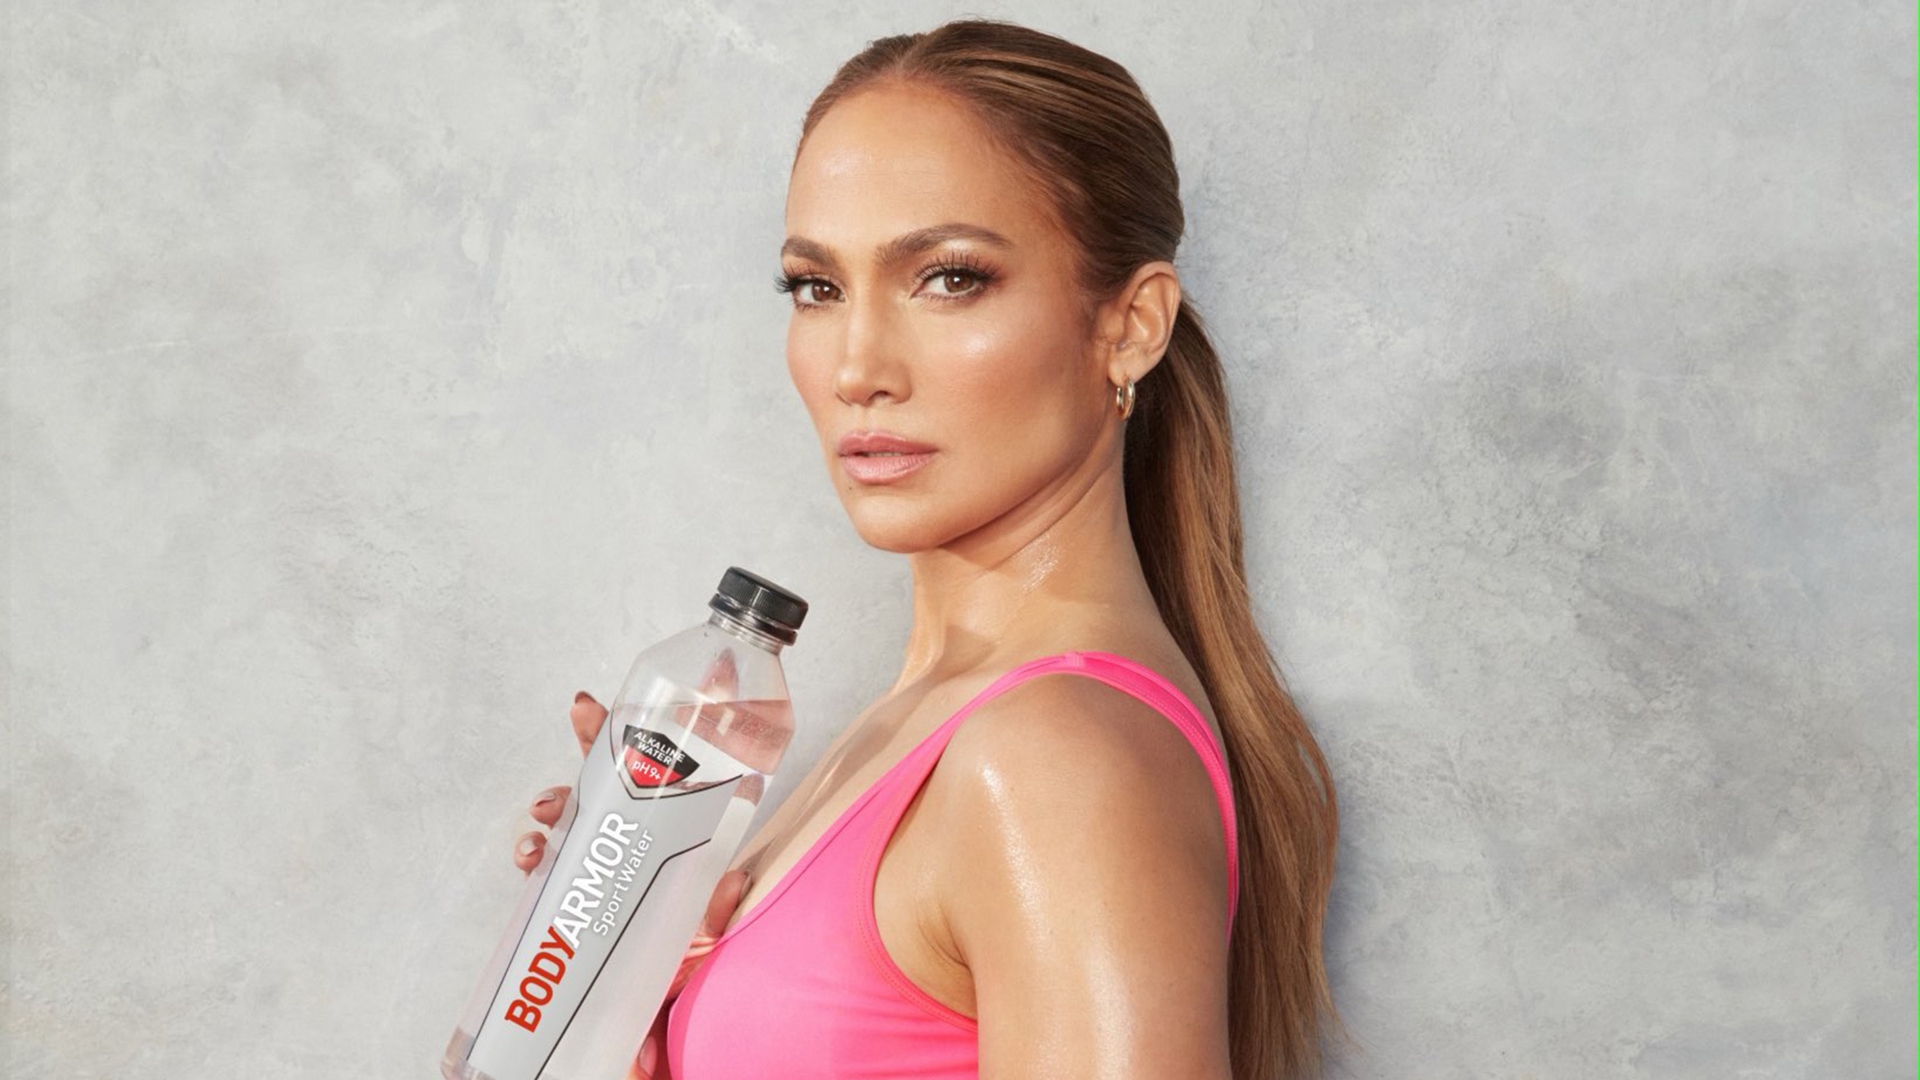 Jennifer Lopez, 53 years old, is a famous figure sporting pink cycling shorts and a sports bra to promote sports drinks